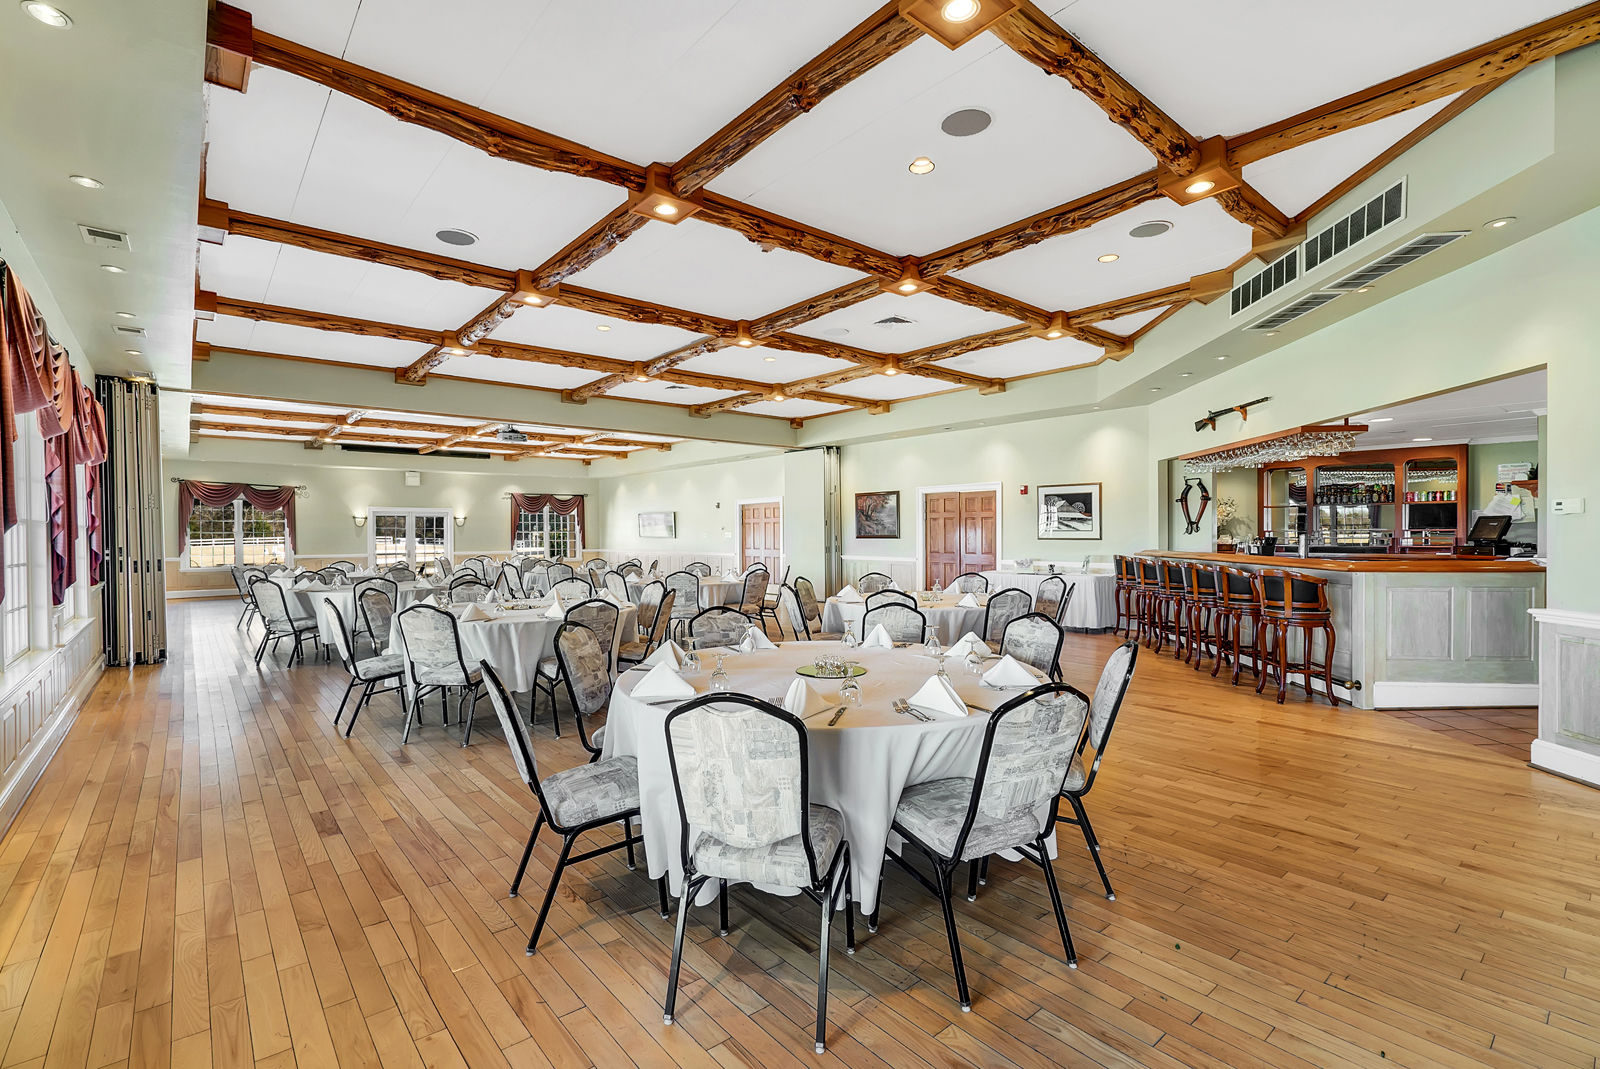 The Inn at Kelly's Ford also includes a restaurant and a pub. (Courtesy Auction Markets LLC)